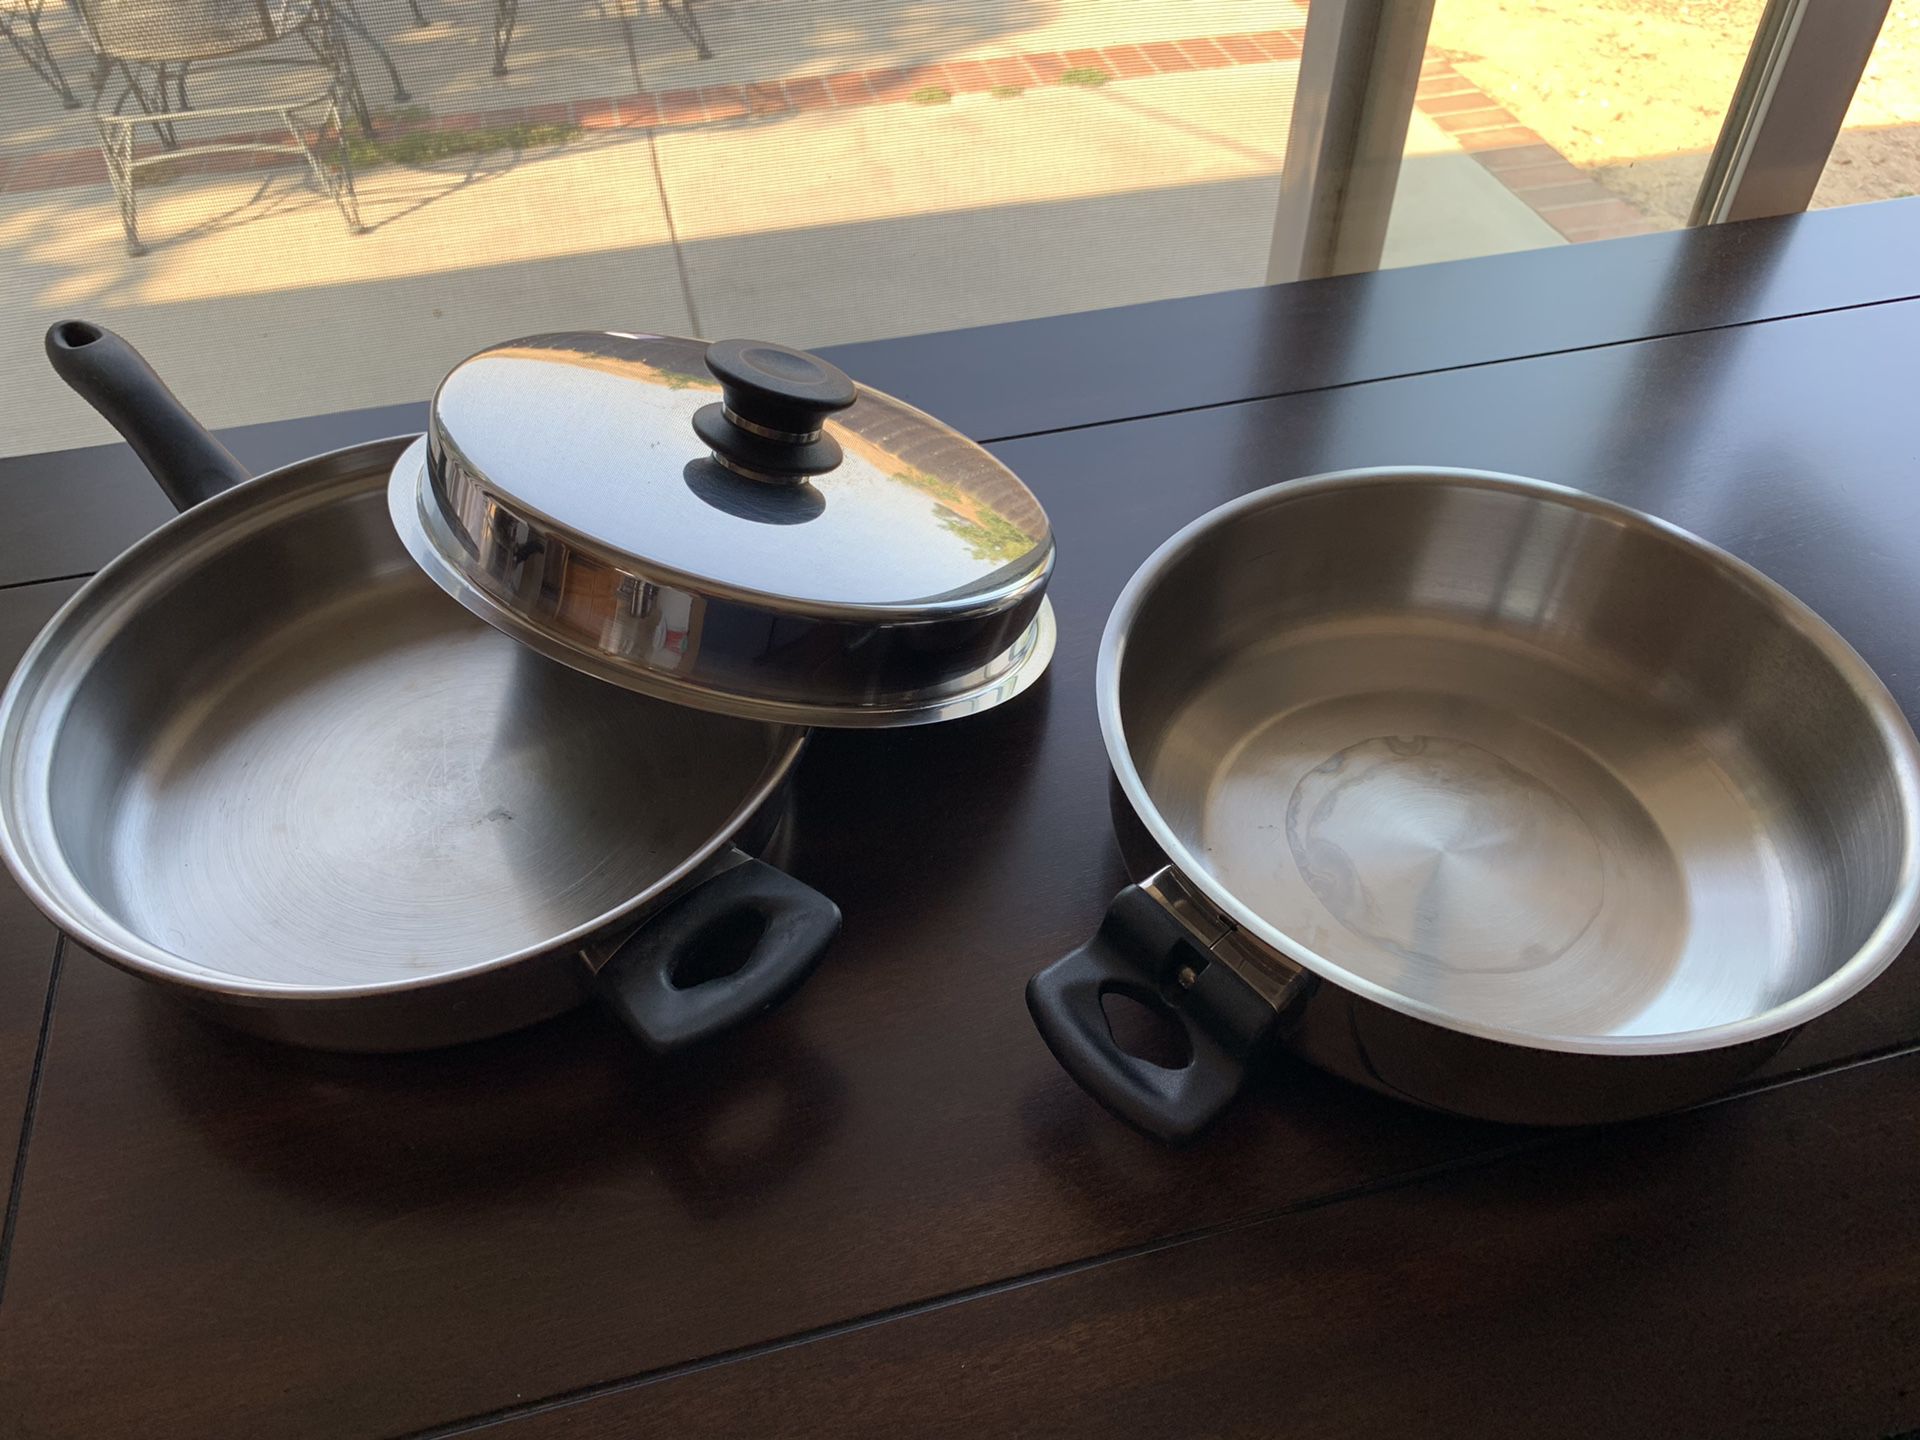 Cook pots and pans